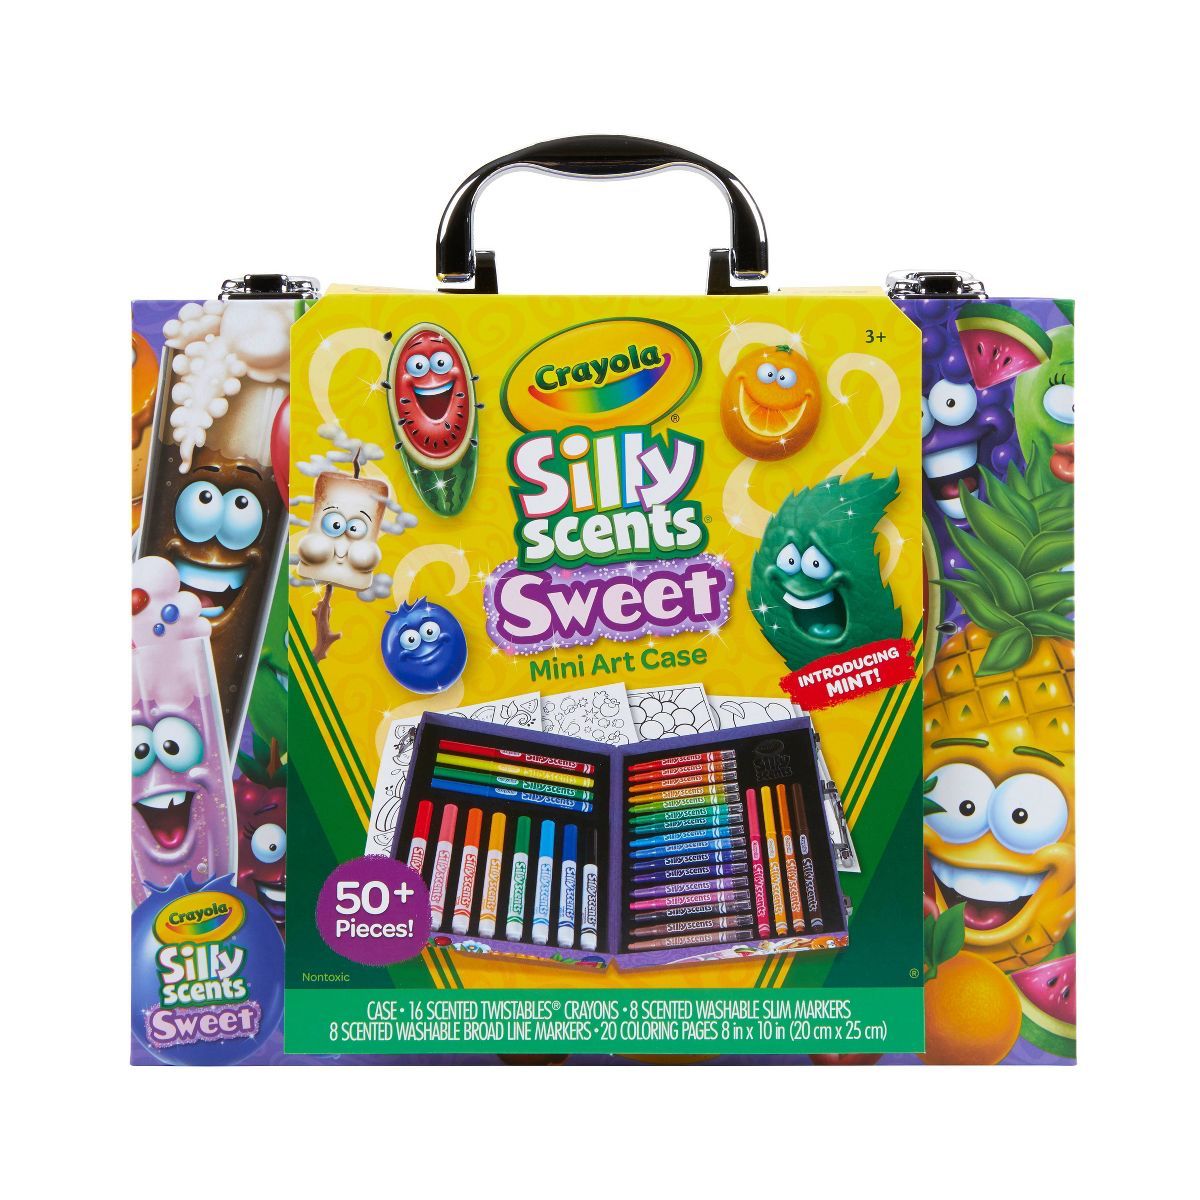 Crayola 53pc Silly Scents Mini Art Case | Target